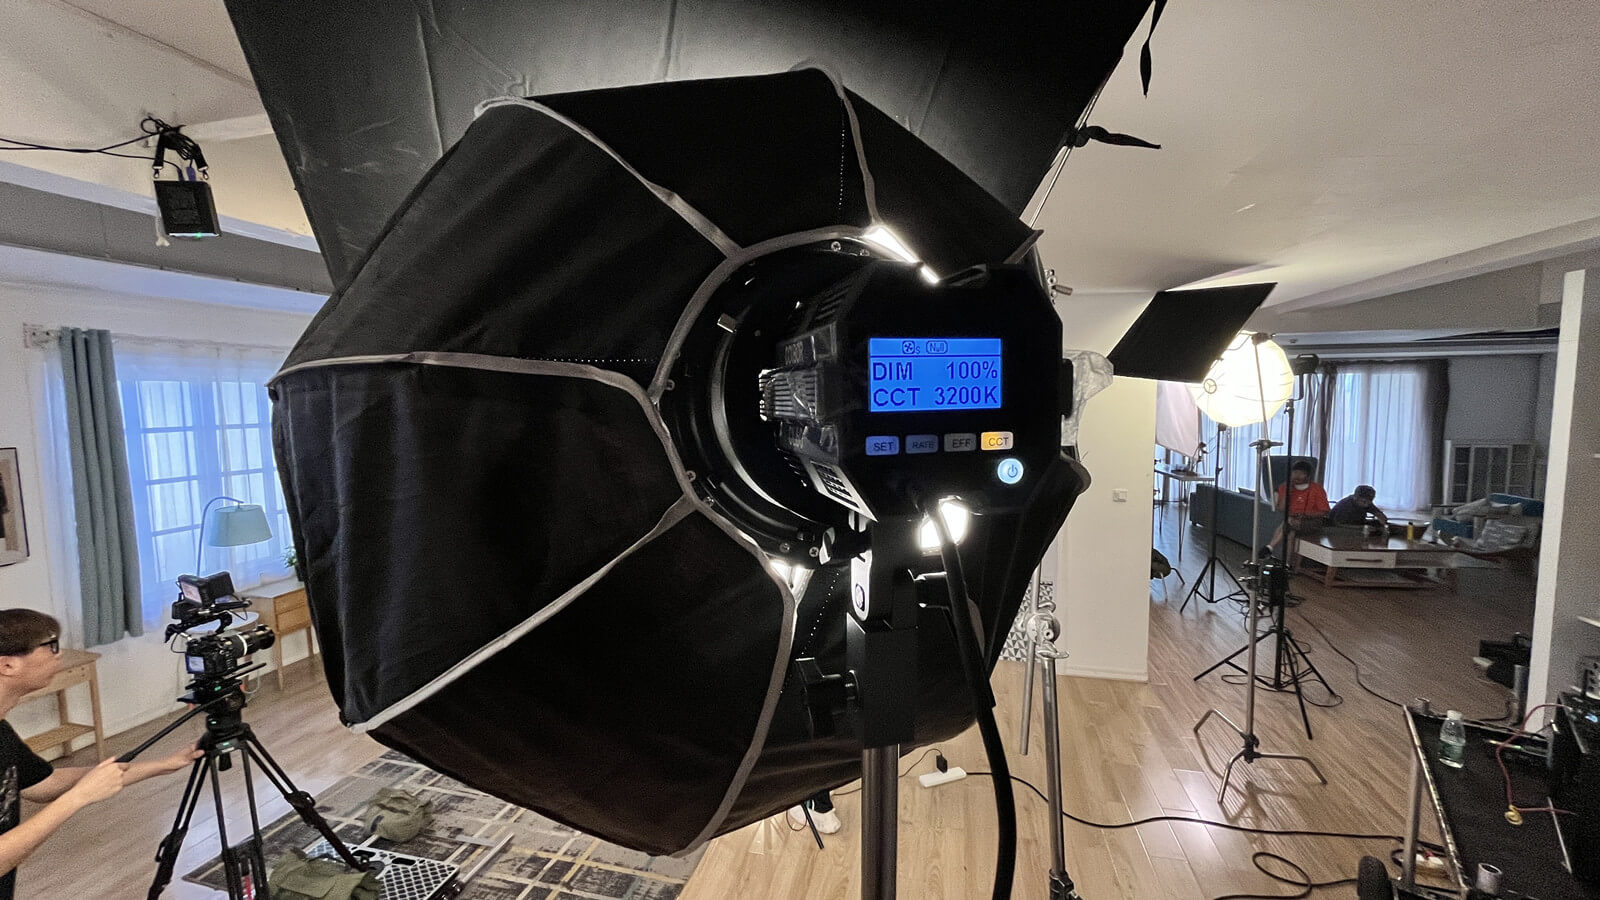 COLBOR LED podcast light is also a good choice for home podcast studios.